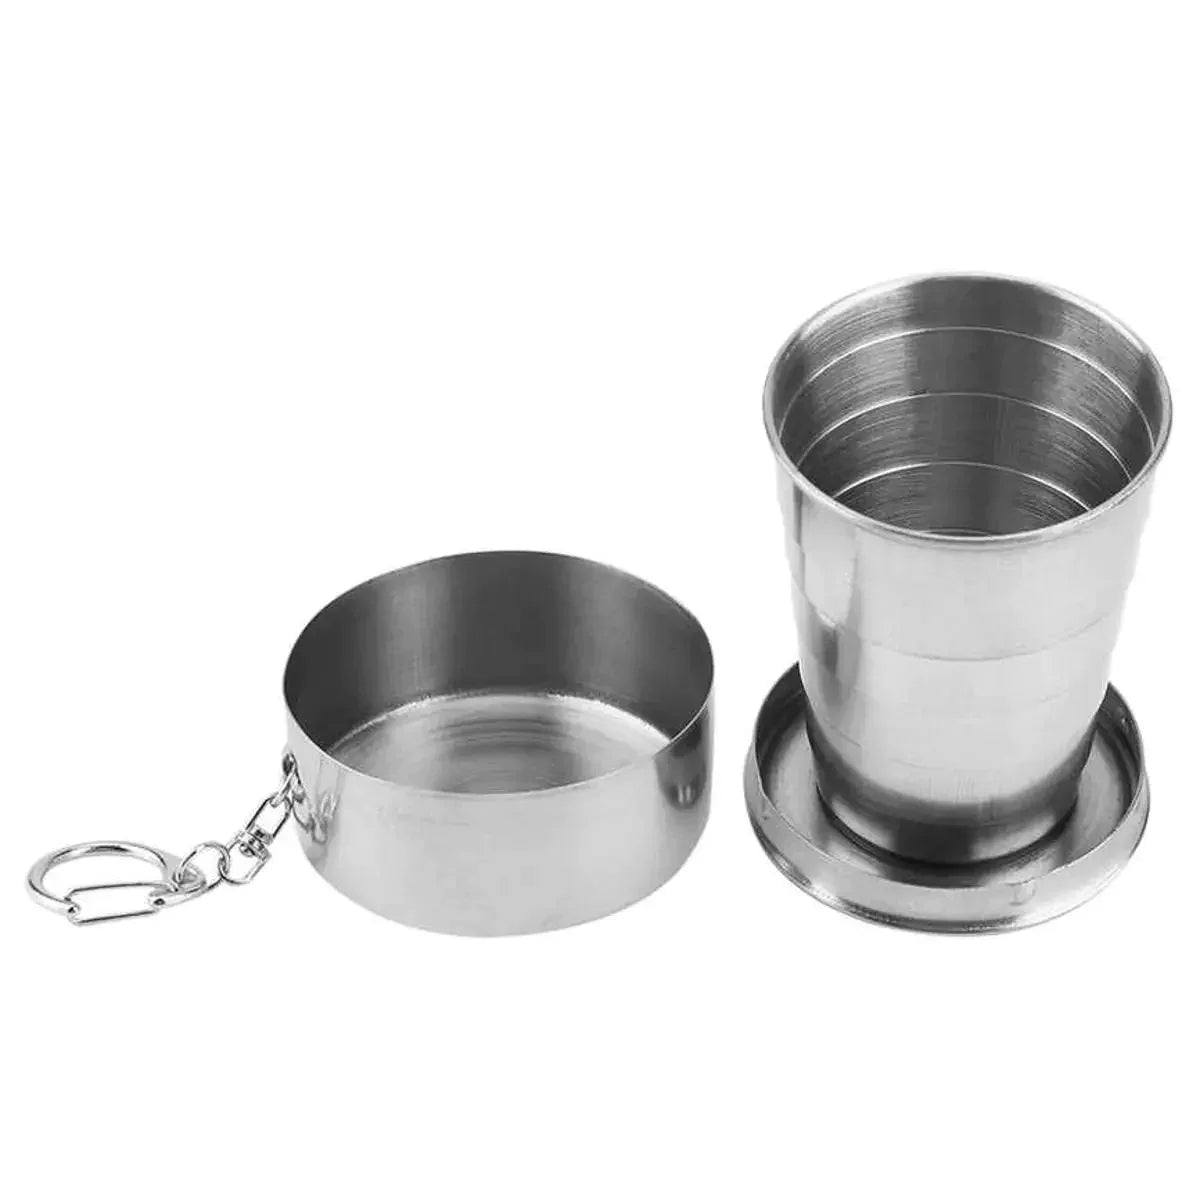 Stainless Steel Collapsible Folding Cup for Traveling Camping DP